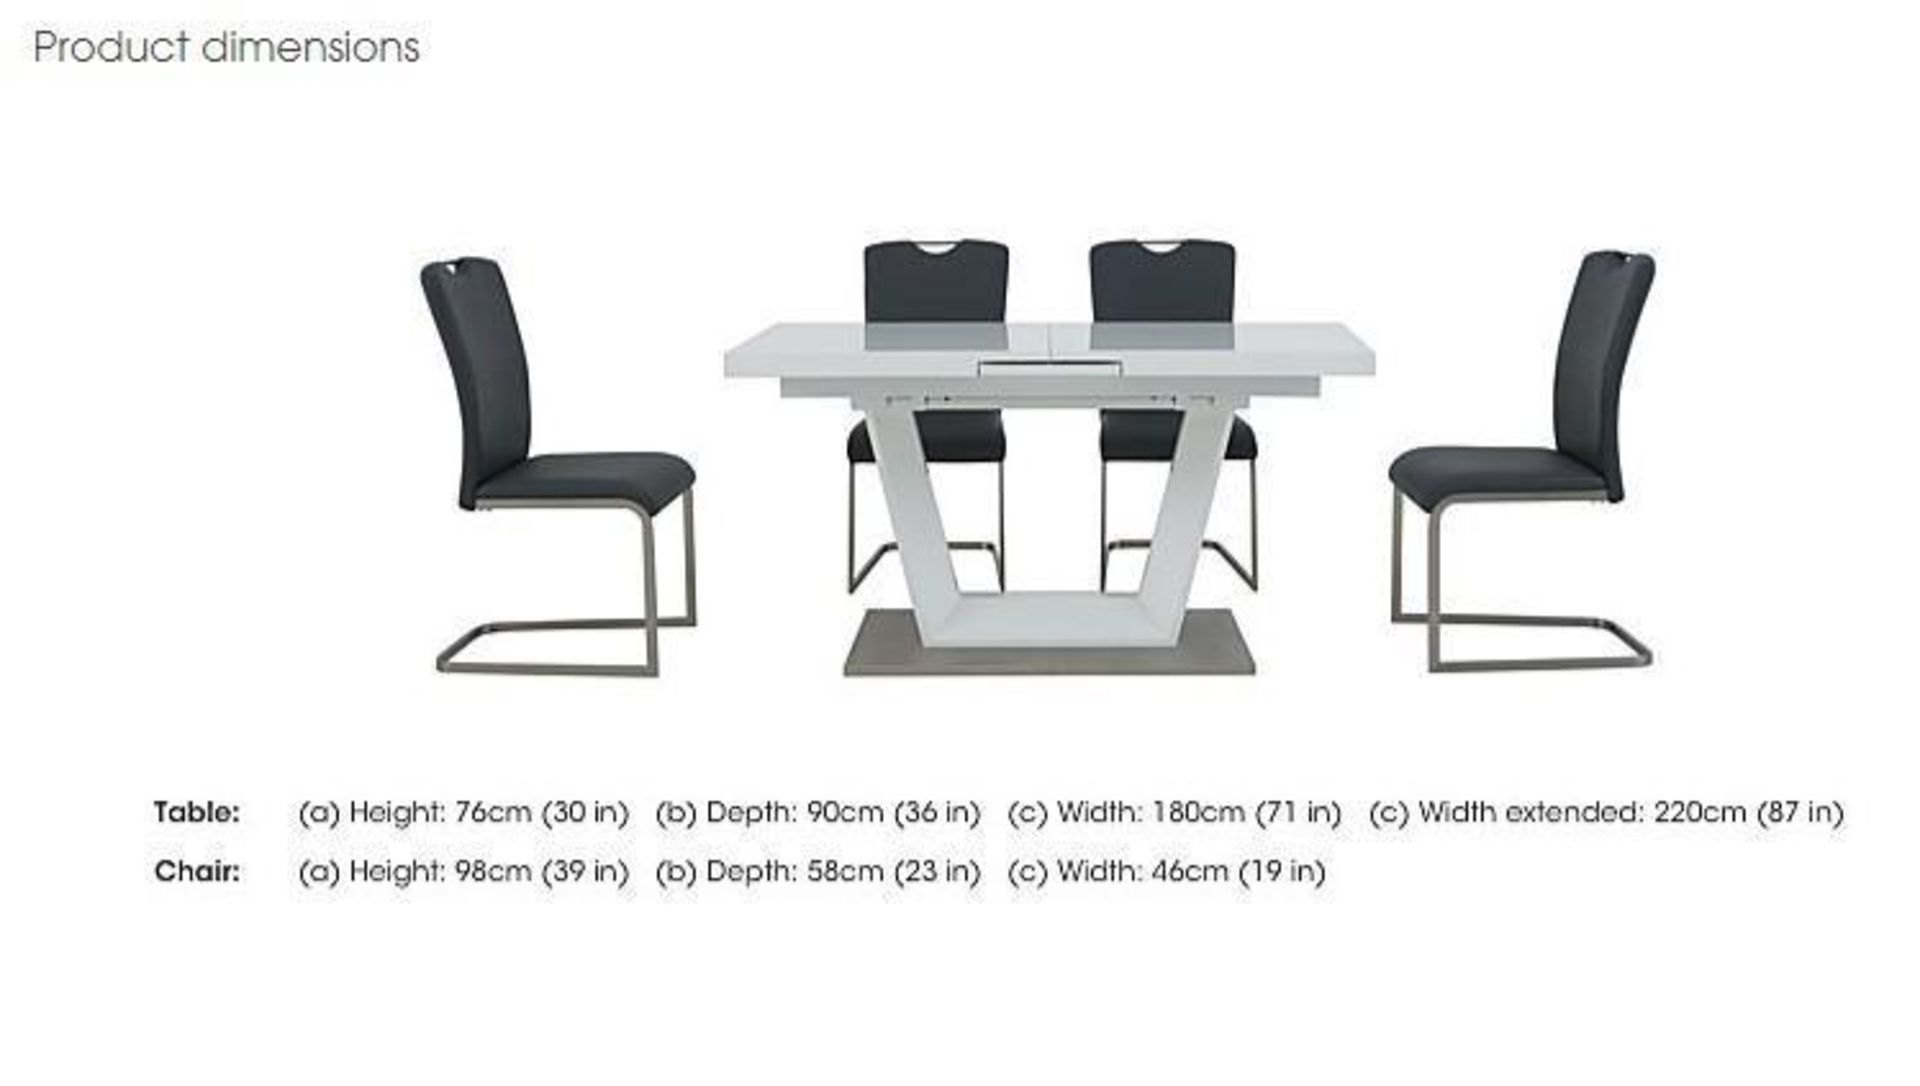 *EX DISPLAY* Bianca furniture village extending white dining table with 6 light grey chairs RRP: £13 - Image 5 of 5